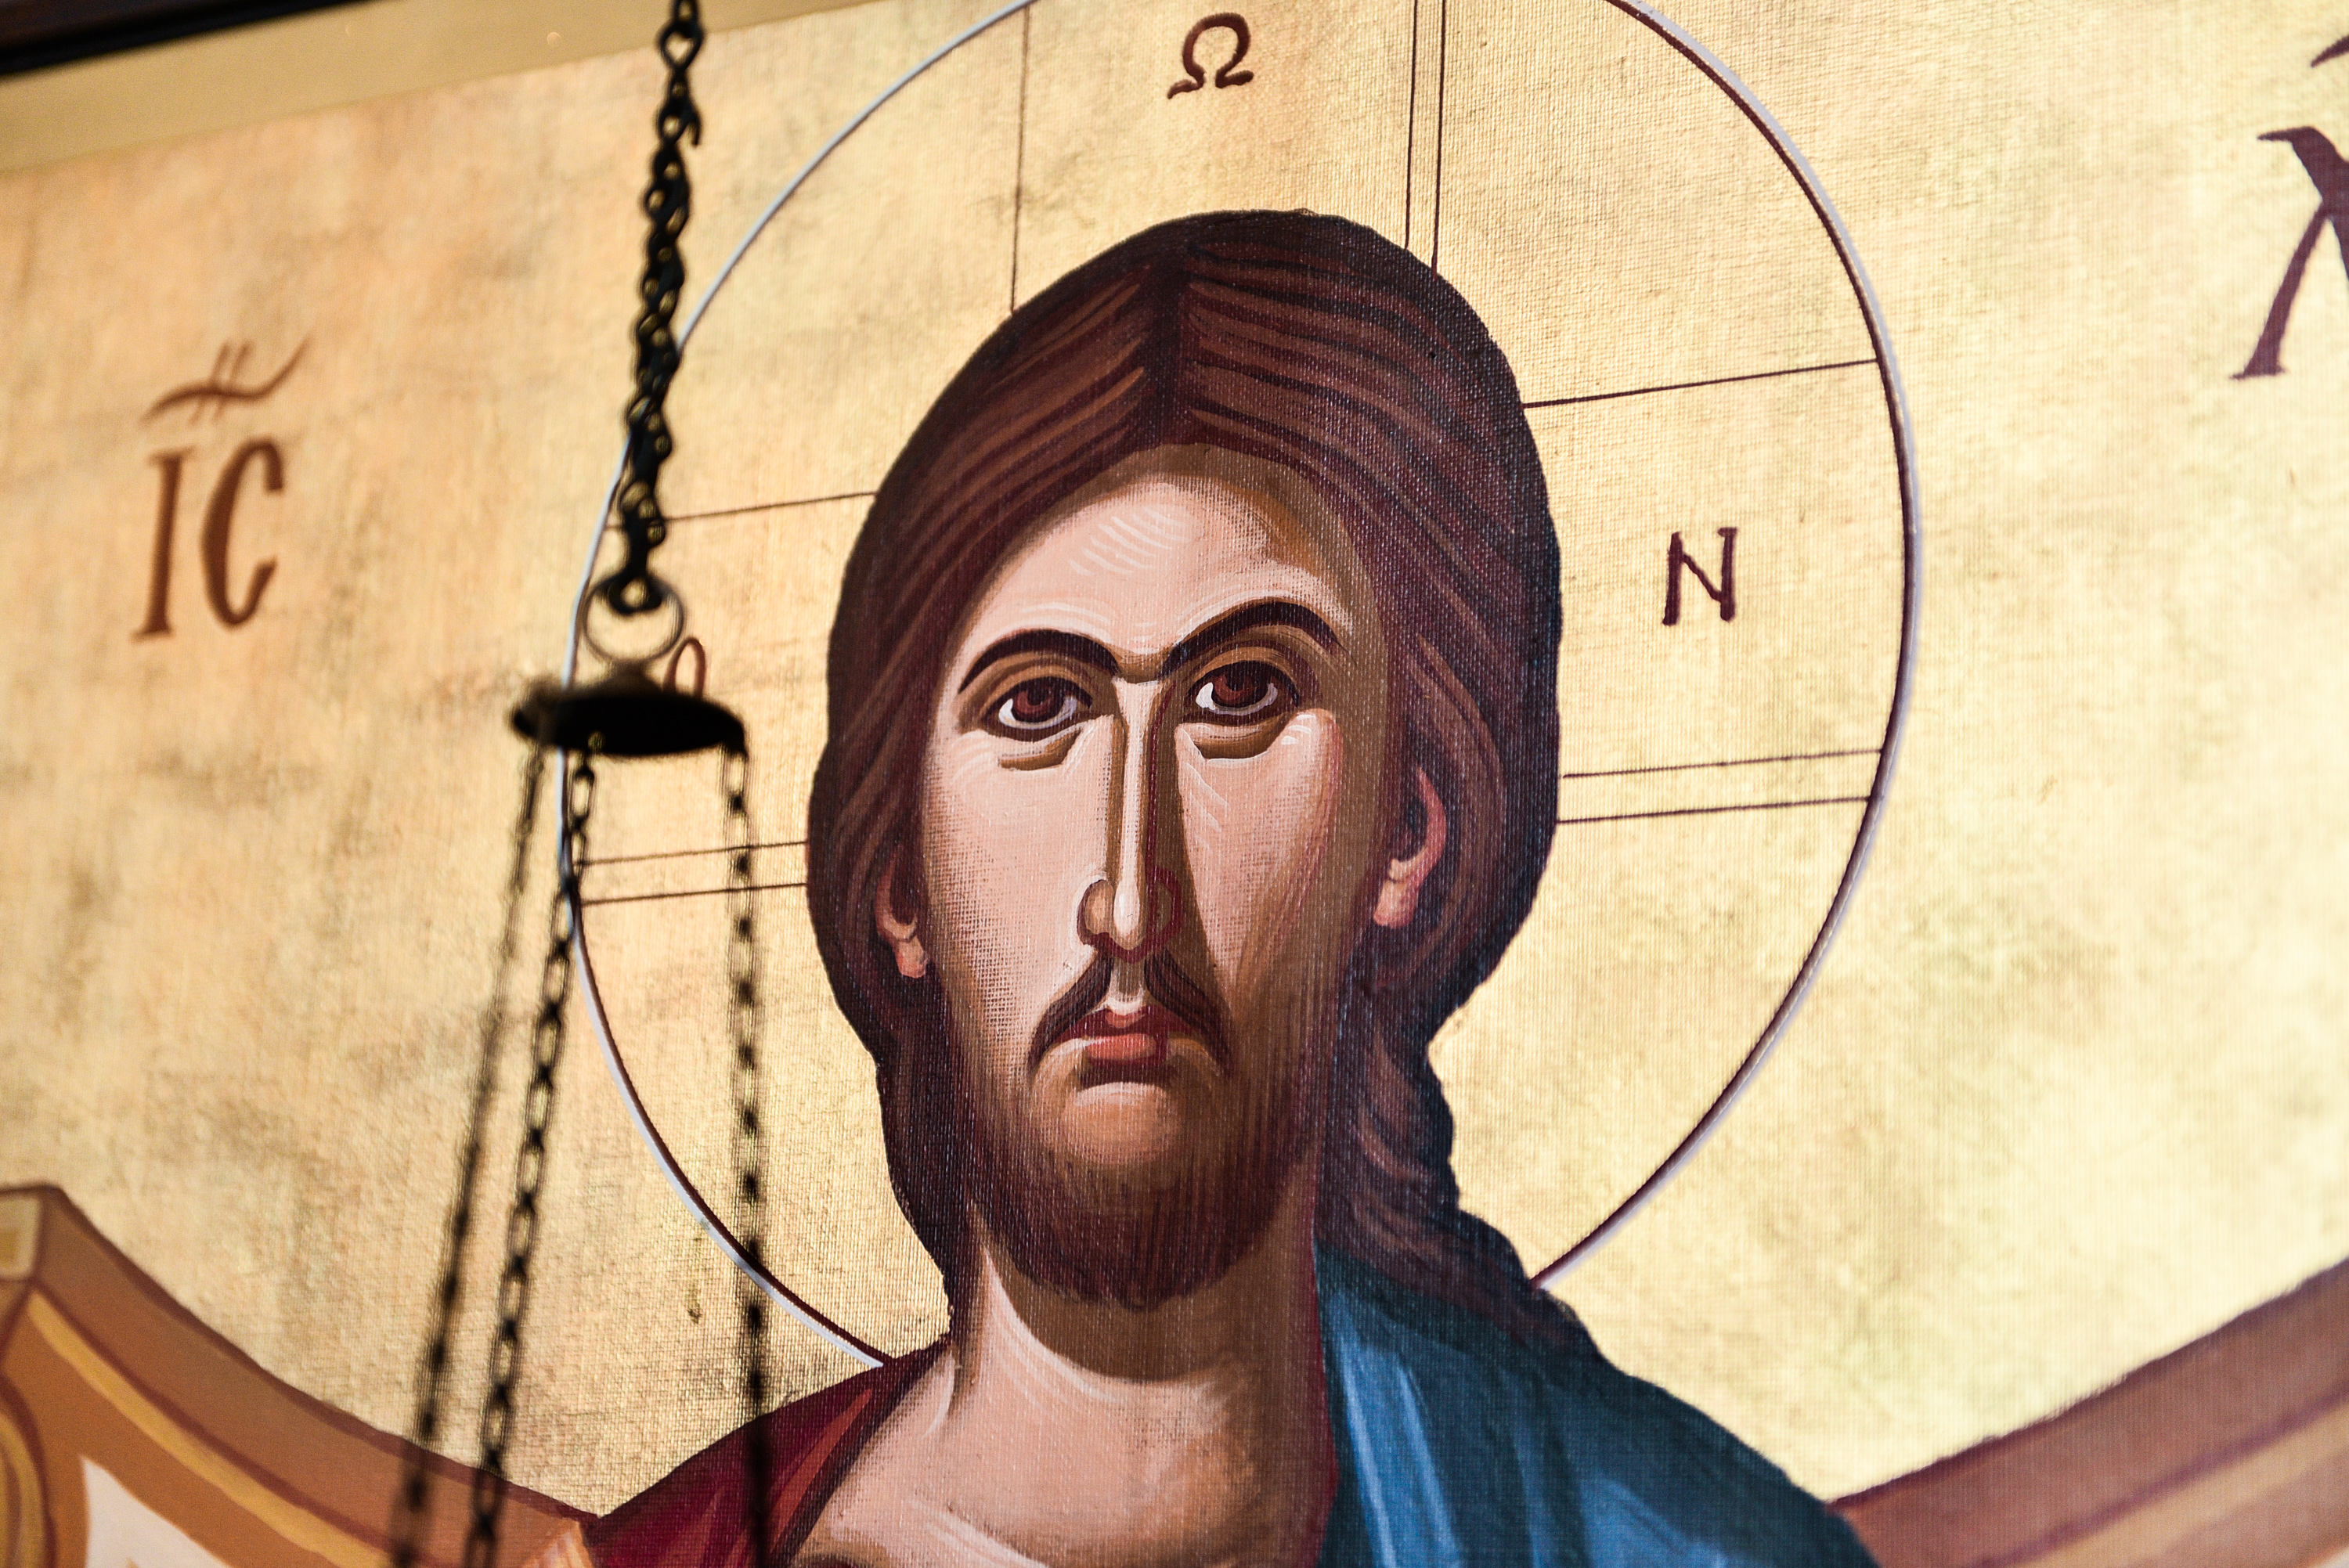 Icon of Christ from Saint George Orthodox Church in Upper Darby, PA.